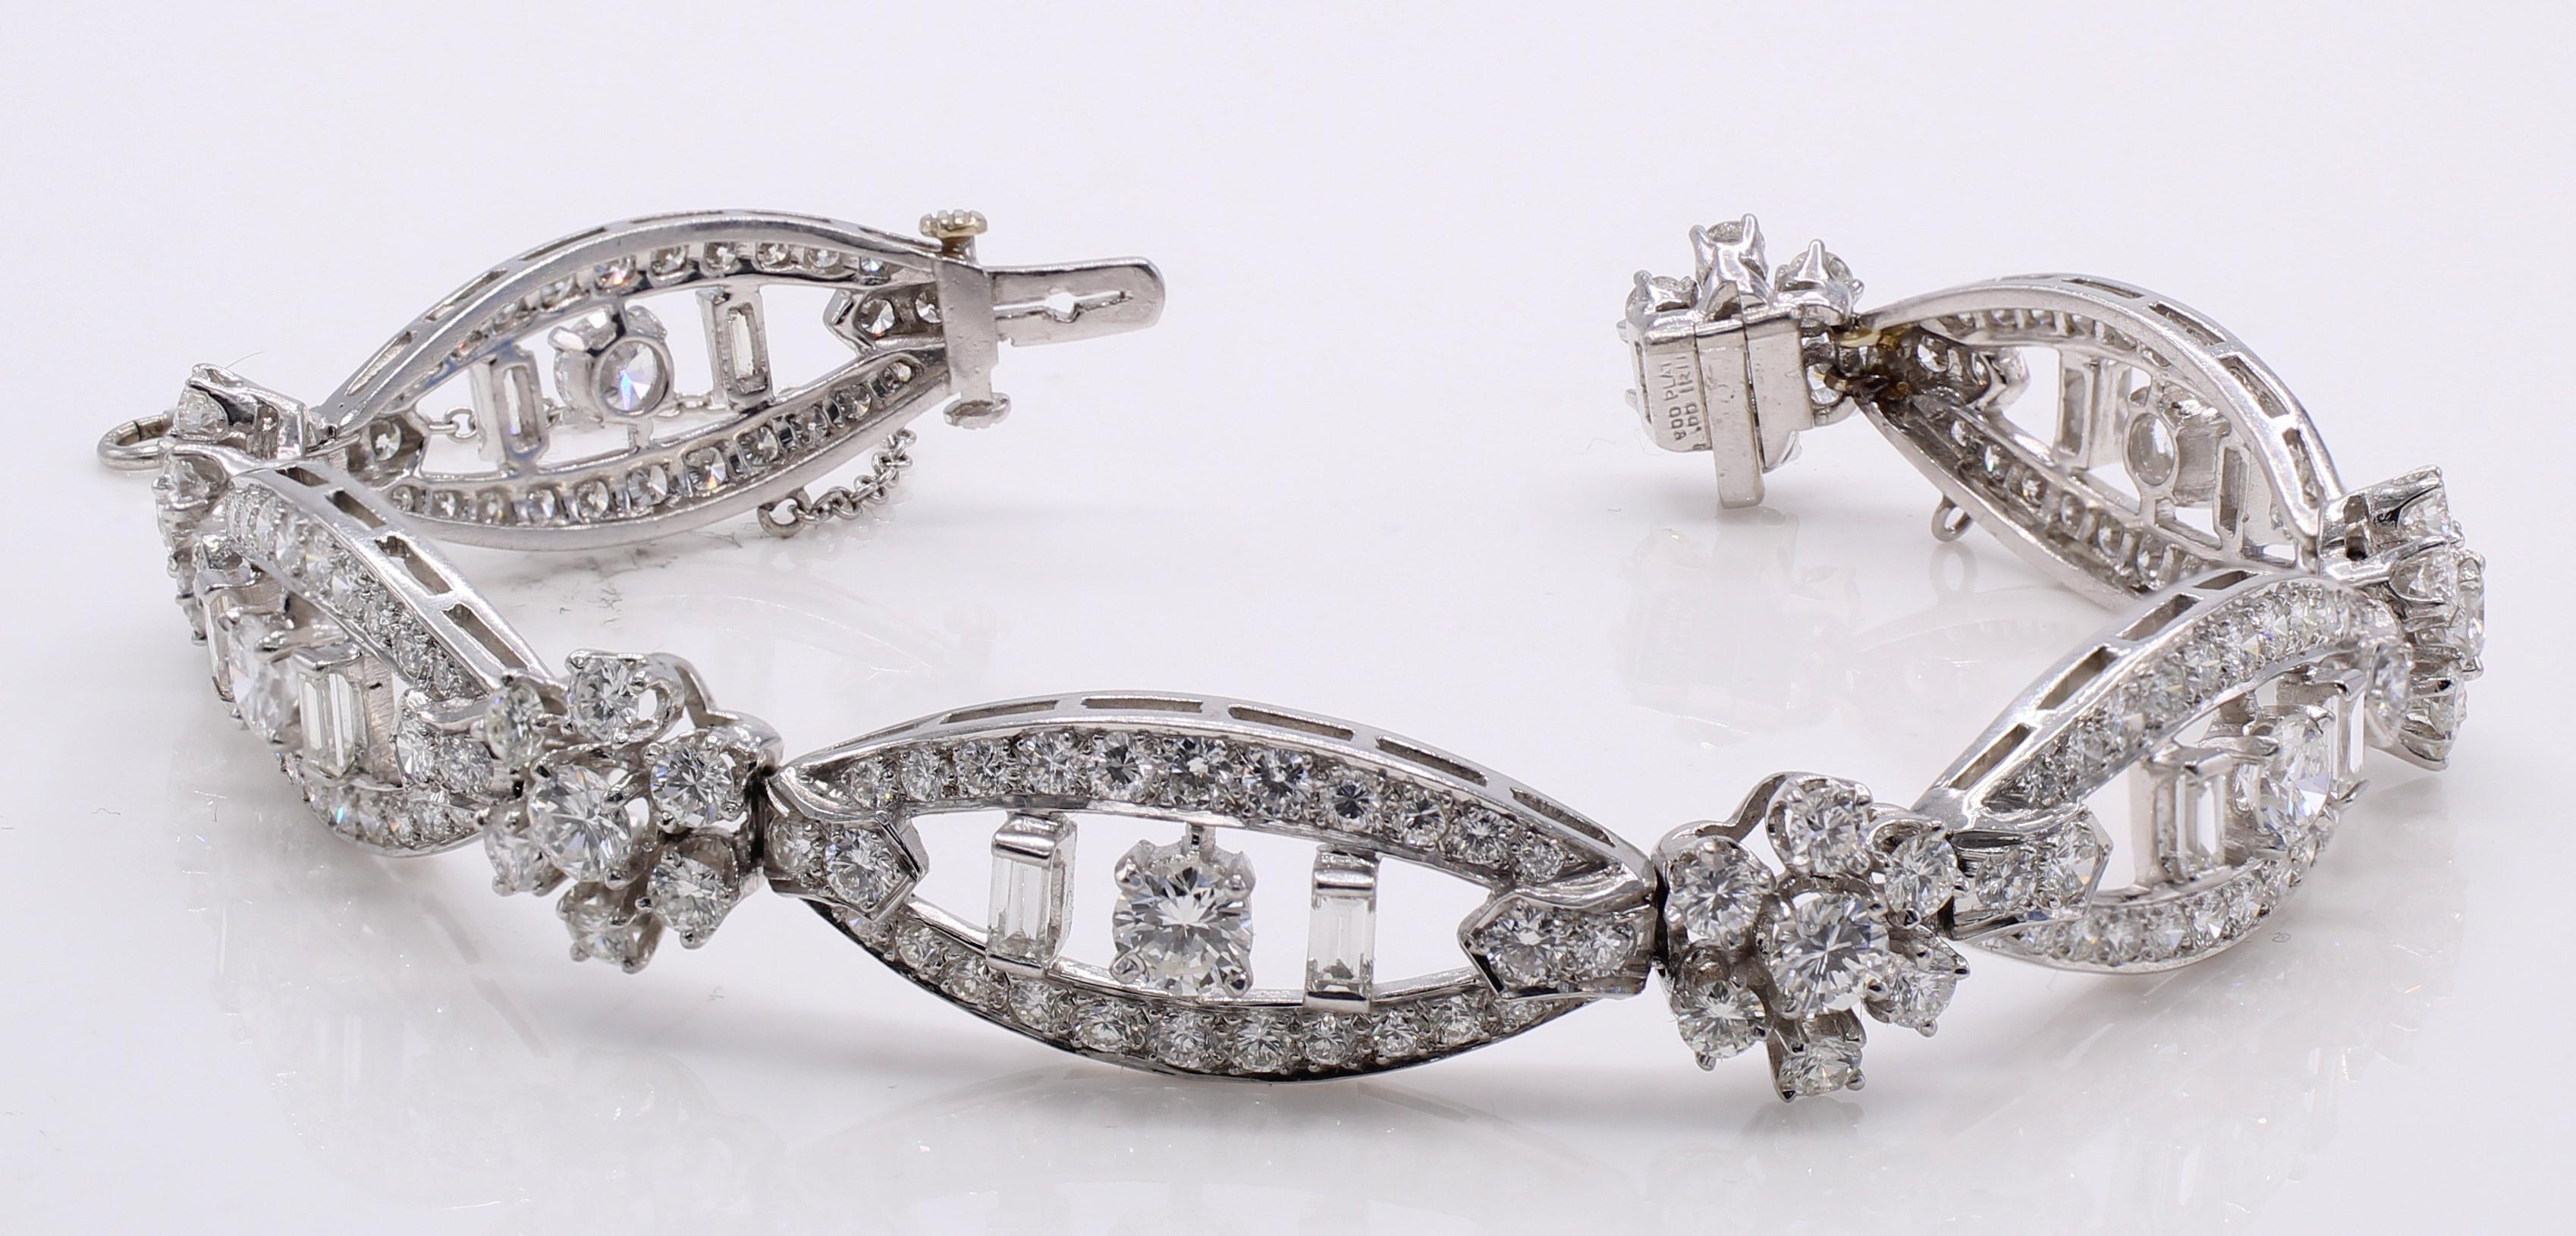 Wonderfully handcrafted 1960s platinum diamond cocktail bracelet. 5 flexible oval sections set with round and baguette cut diamonds and spaced by 5 rosette shaped sections set with round brilliant cut diamonds give this bracelet its chic and elegant